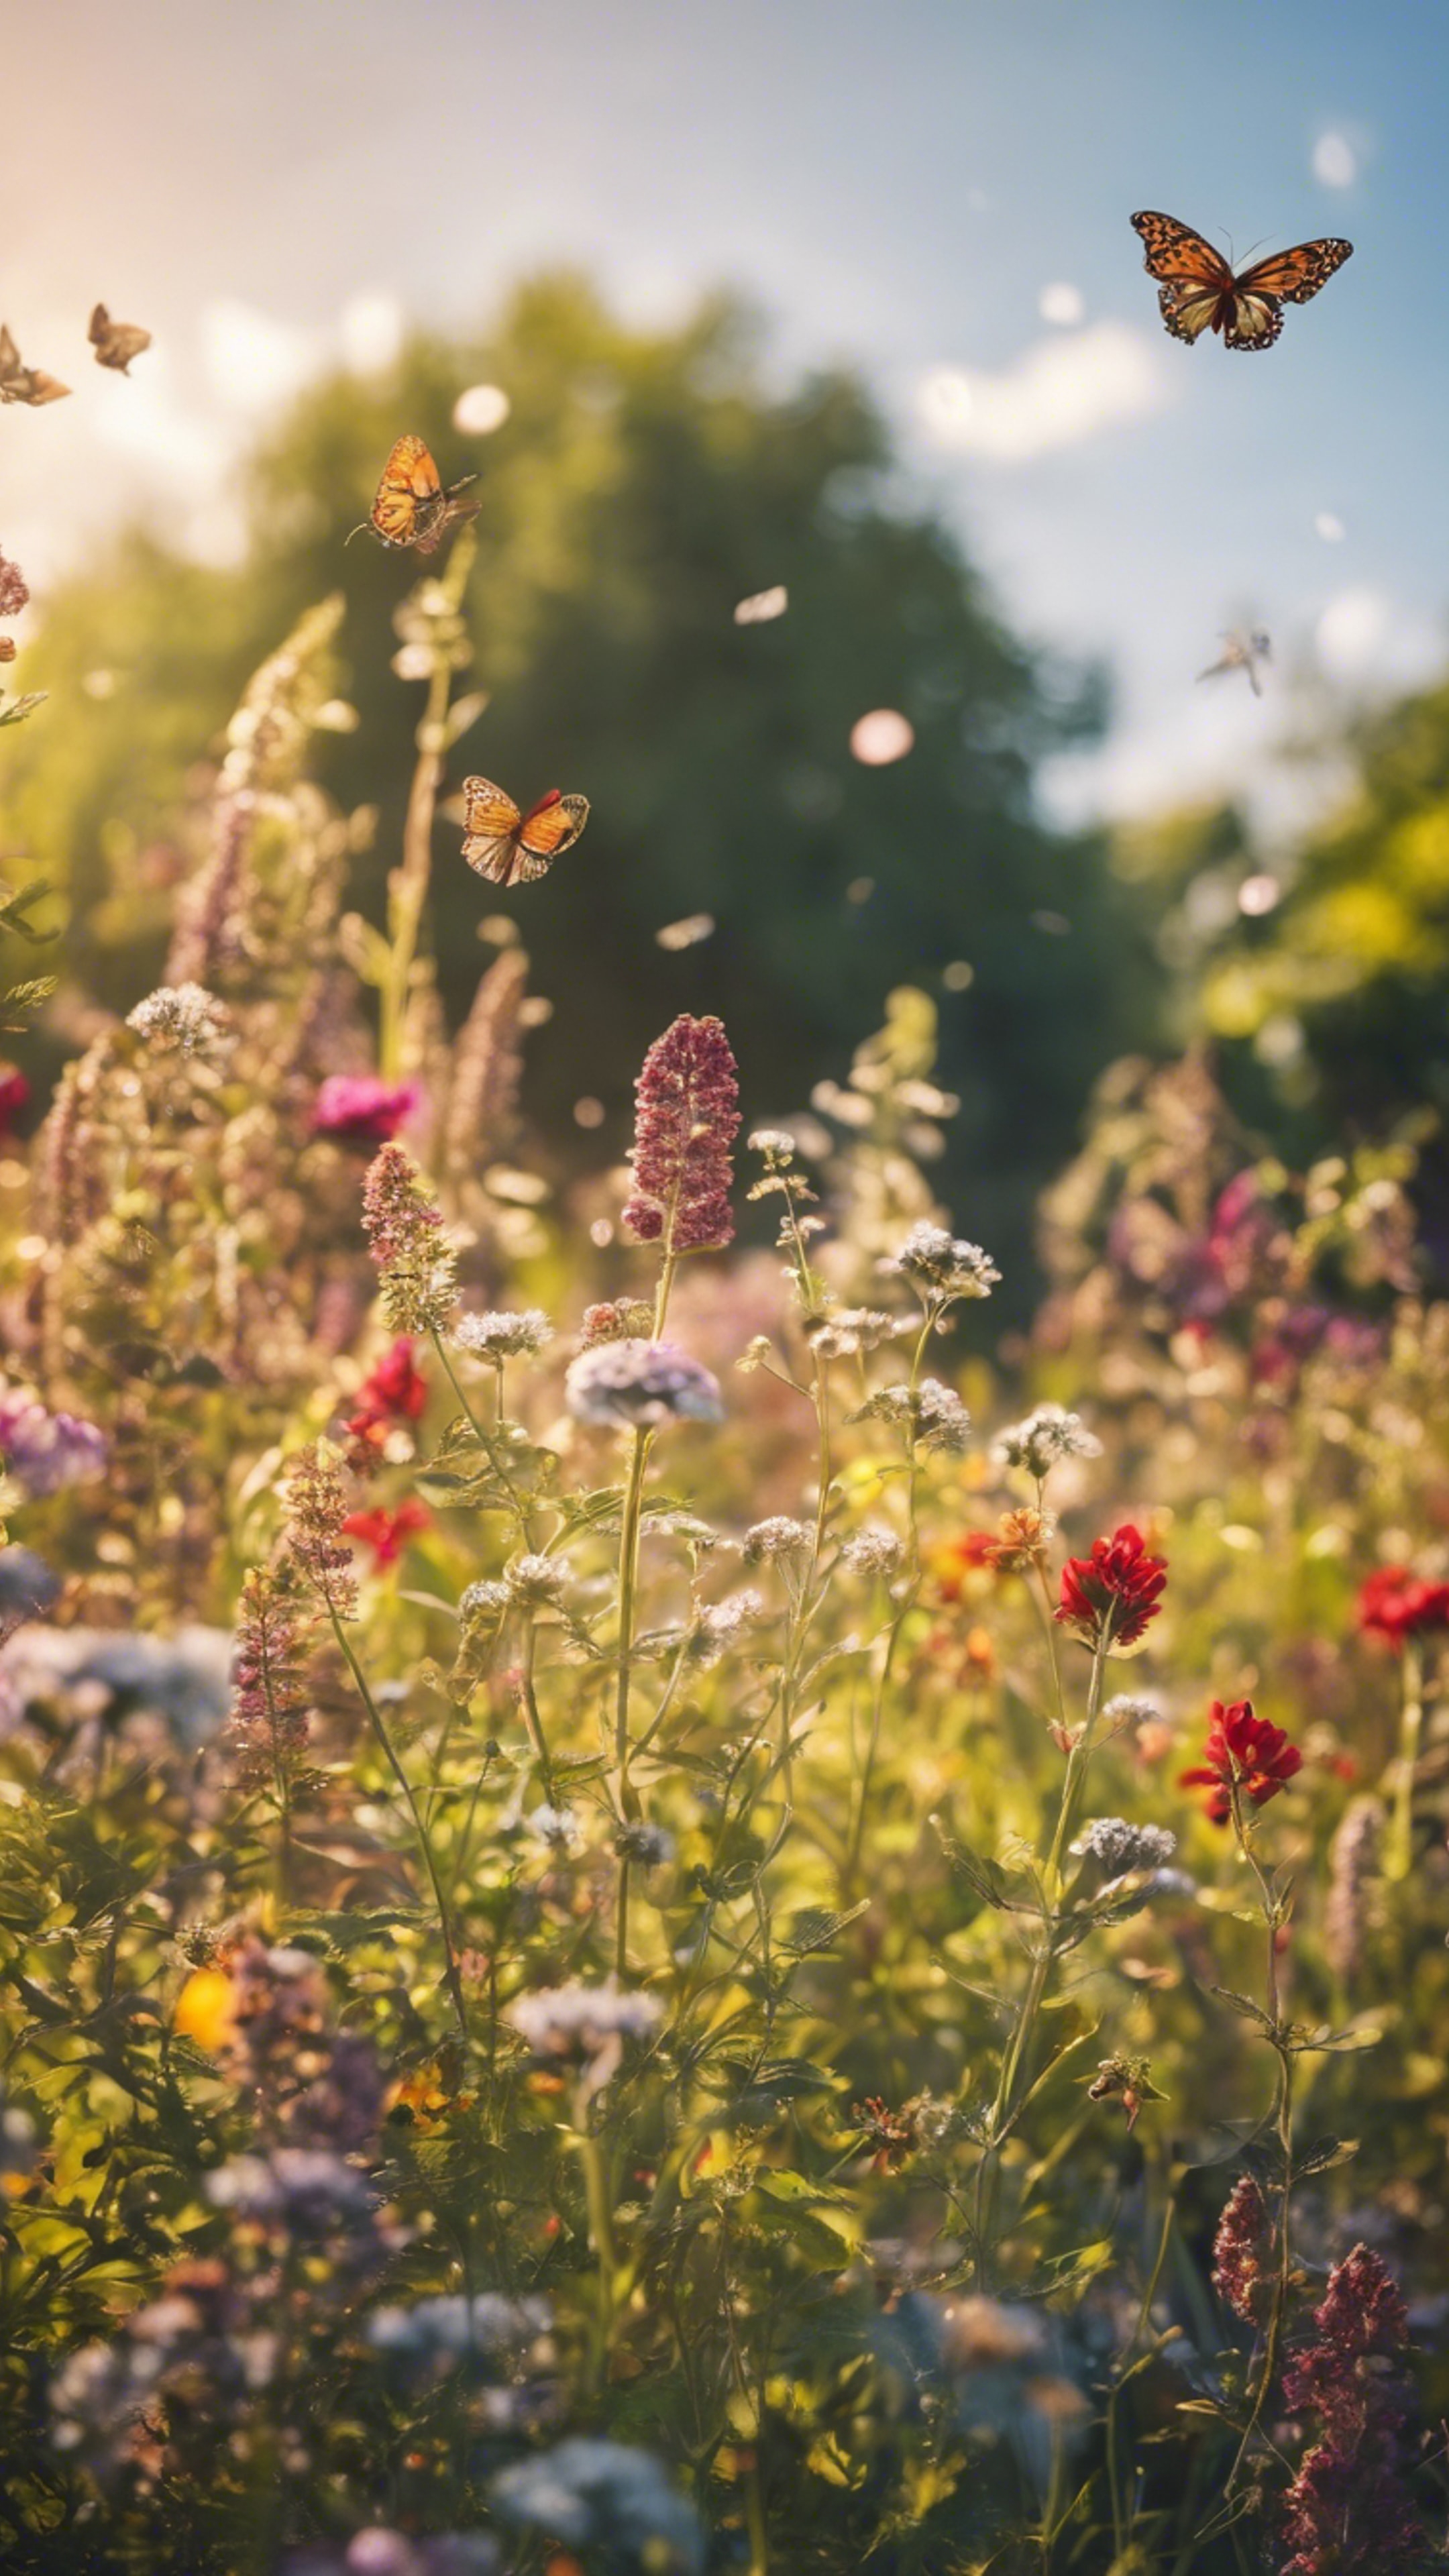 A colorful scene of a French country garden bursting with wildflowers and butterflies under a warm afternoon sun. Tapéta[d1166188c03b4b319ebf]